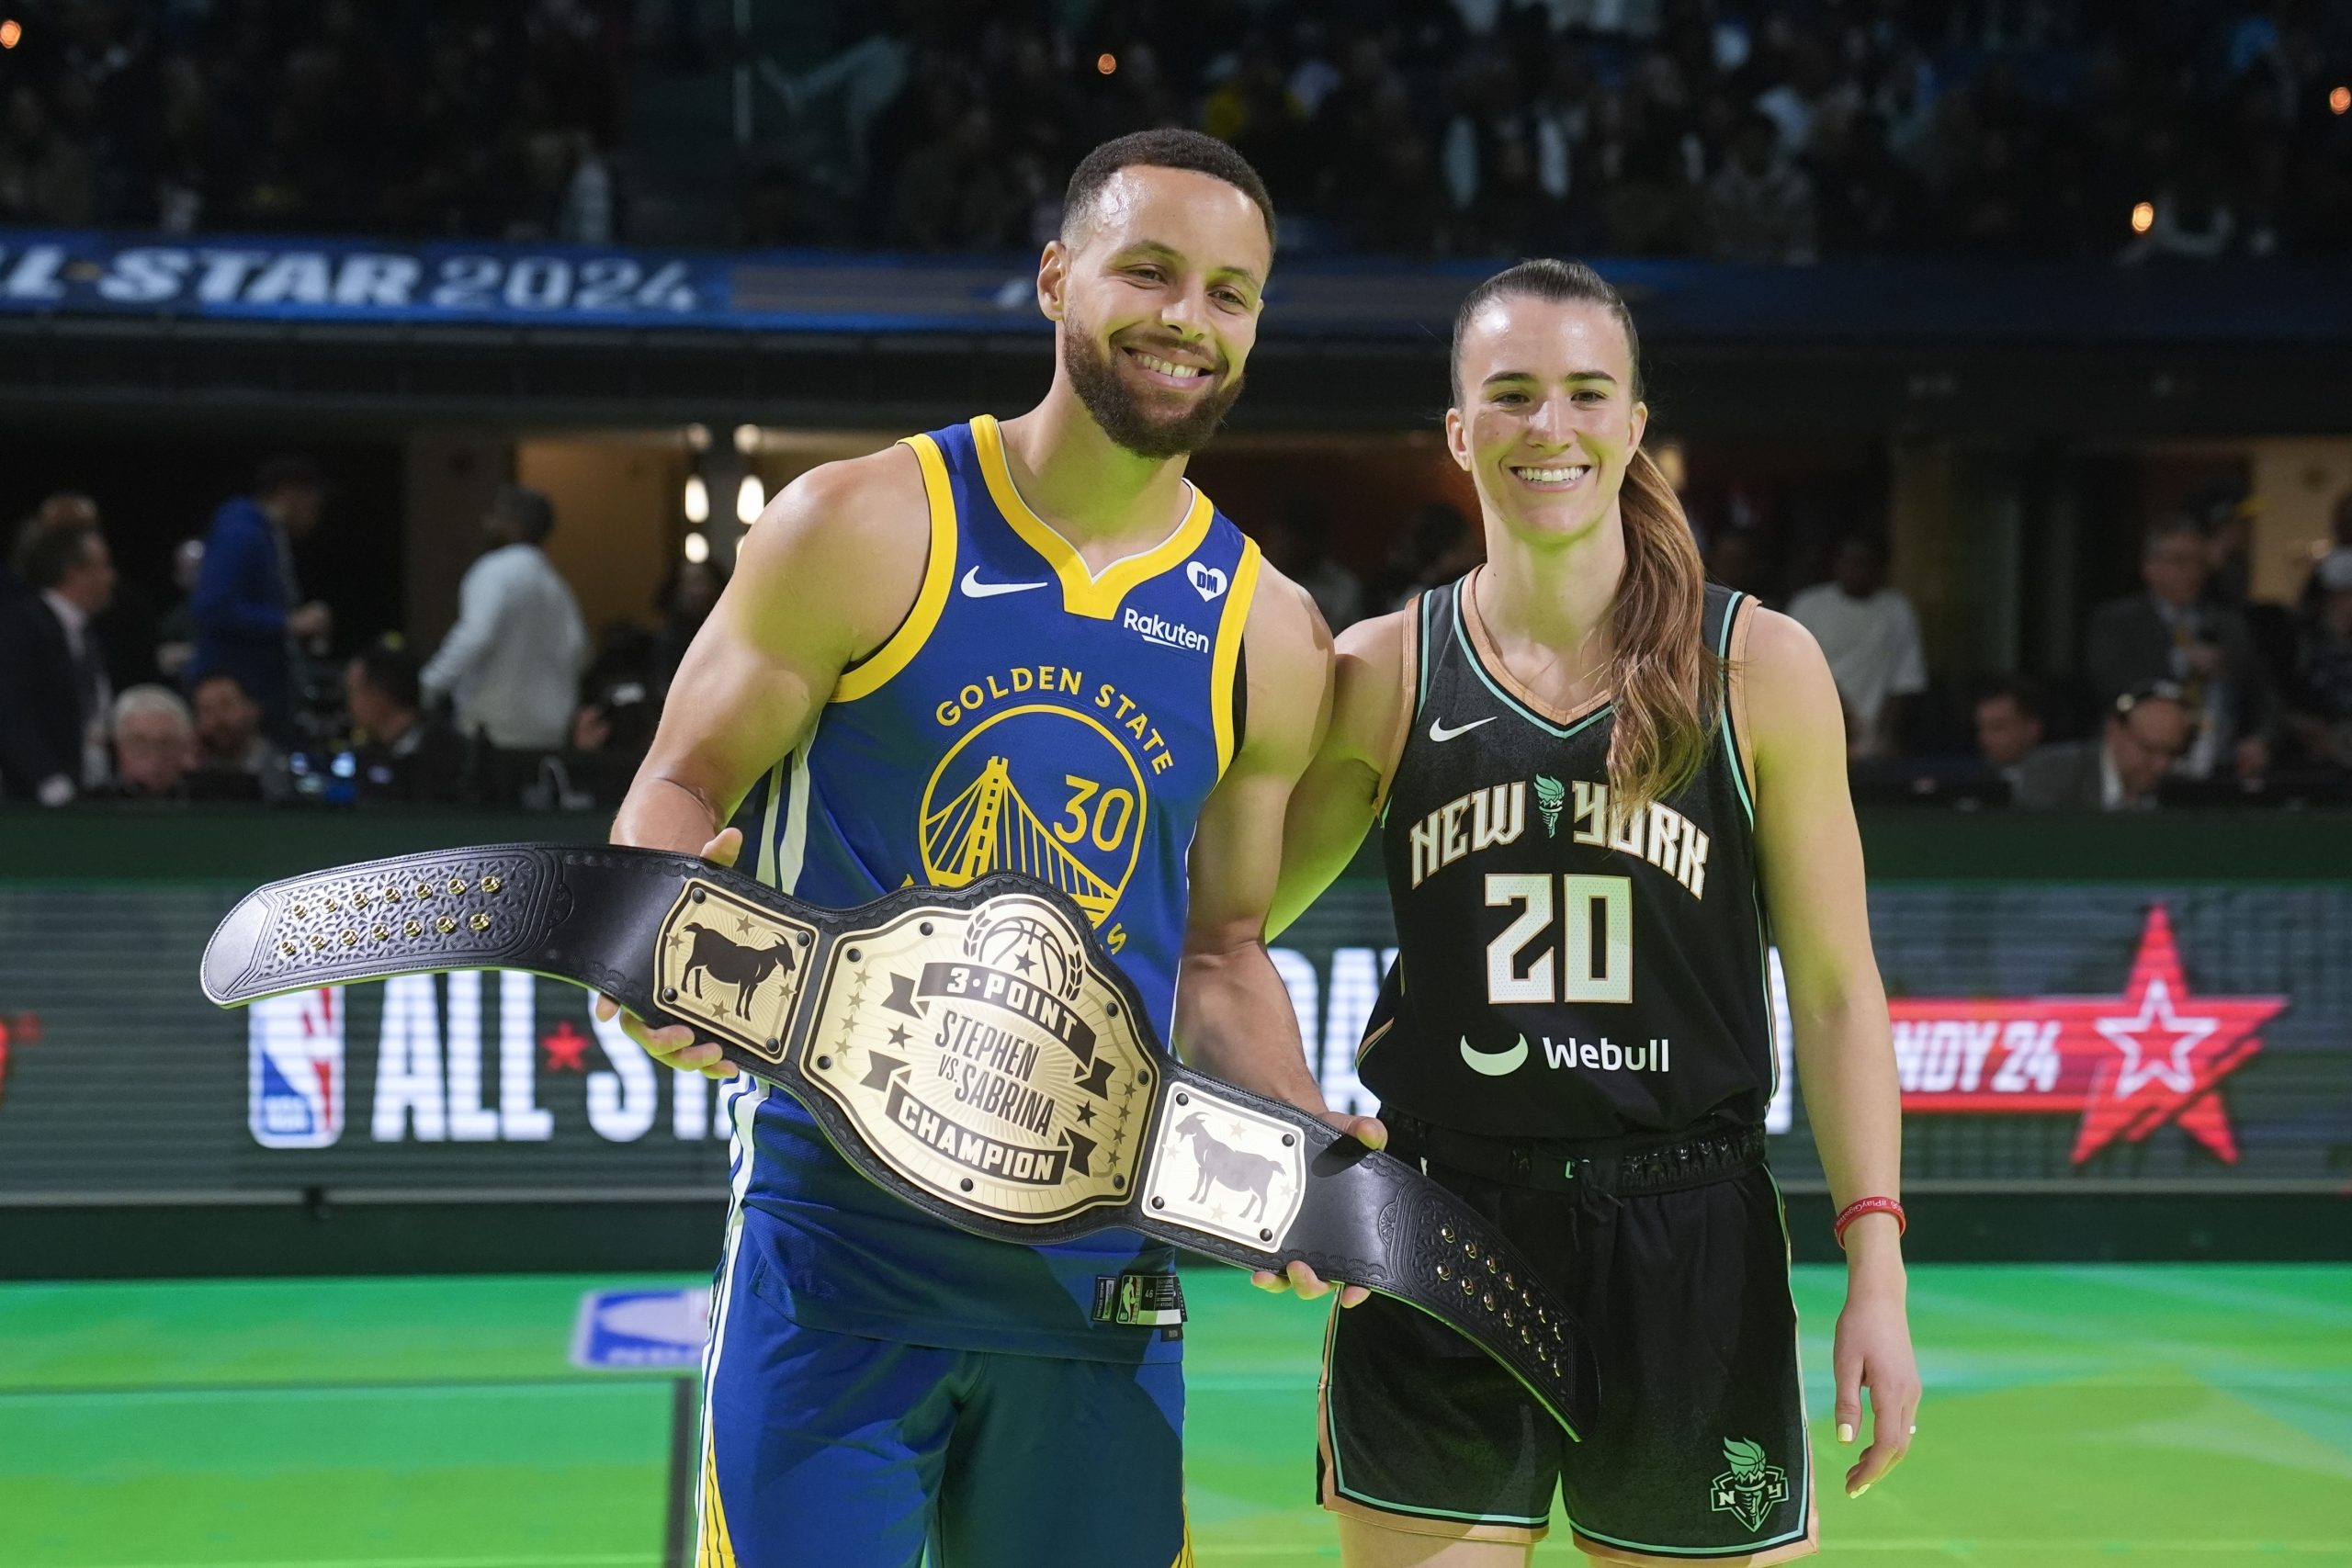 Stephen Curry Beats Sabrina Ionescu In 3-Point Contest